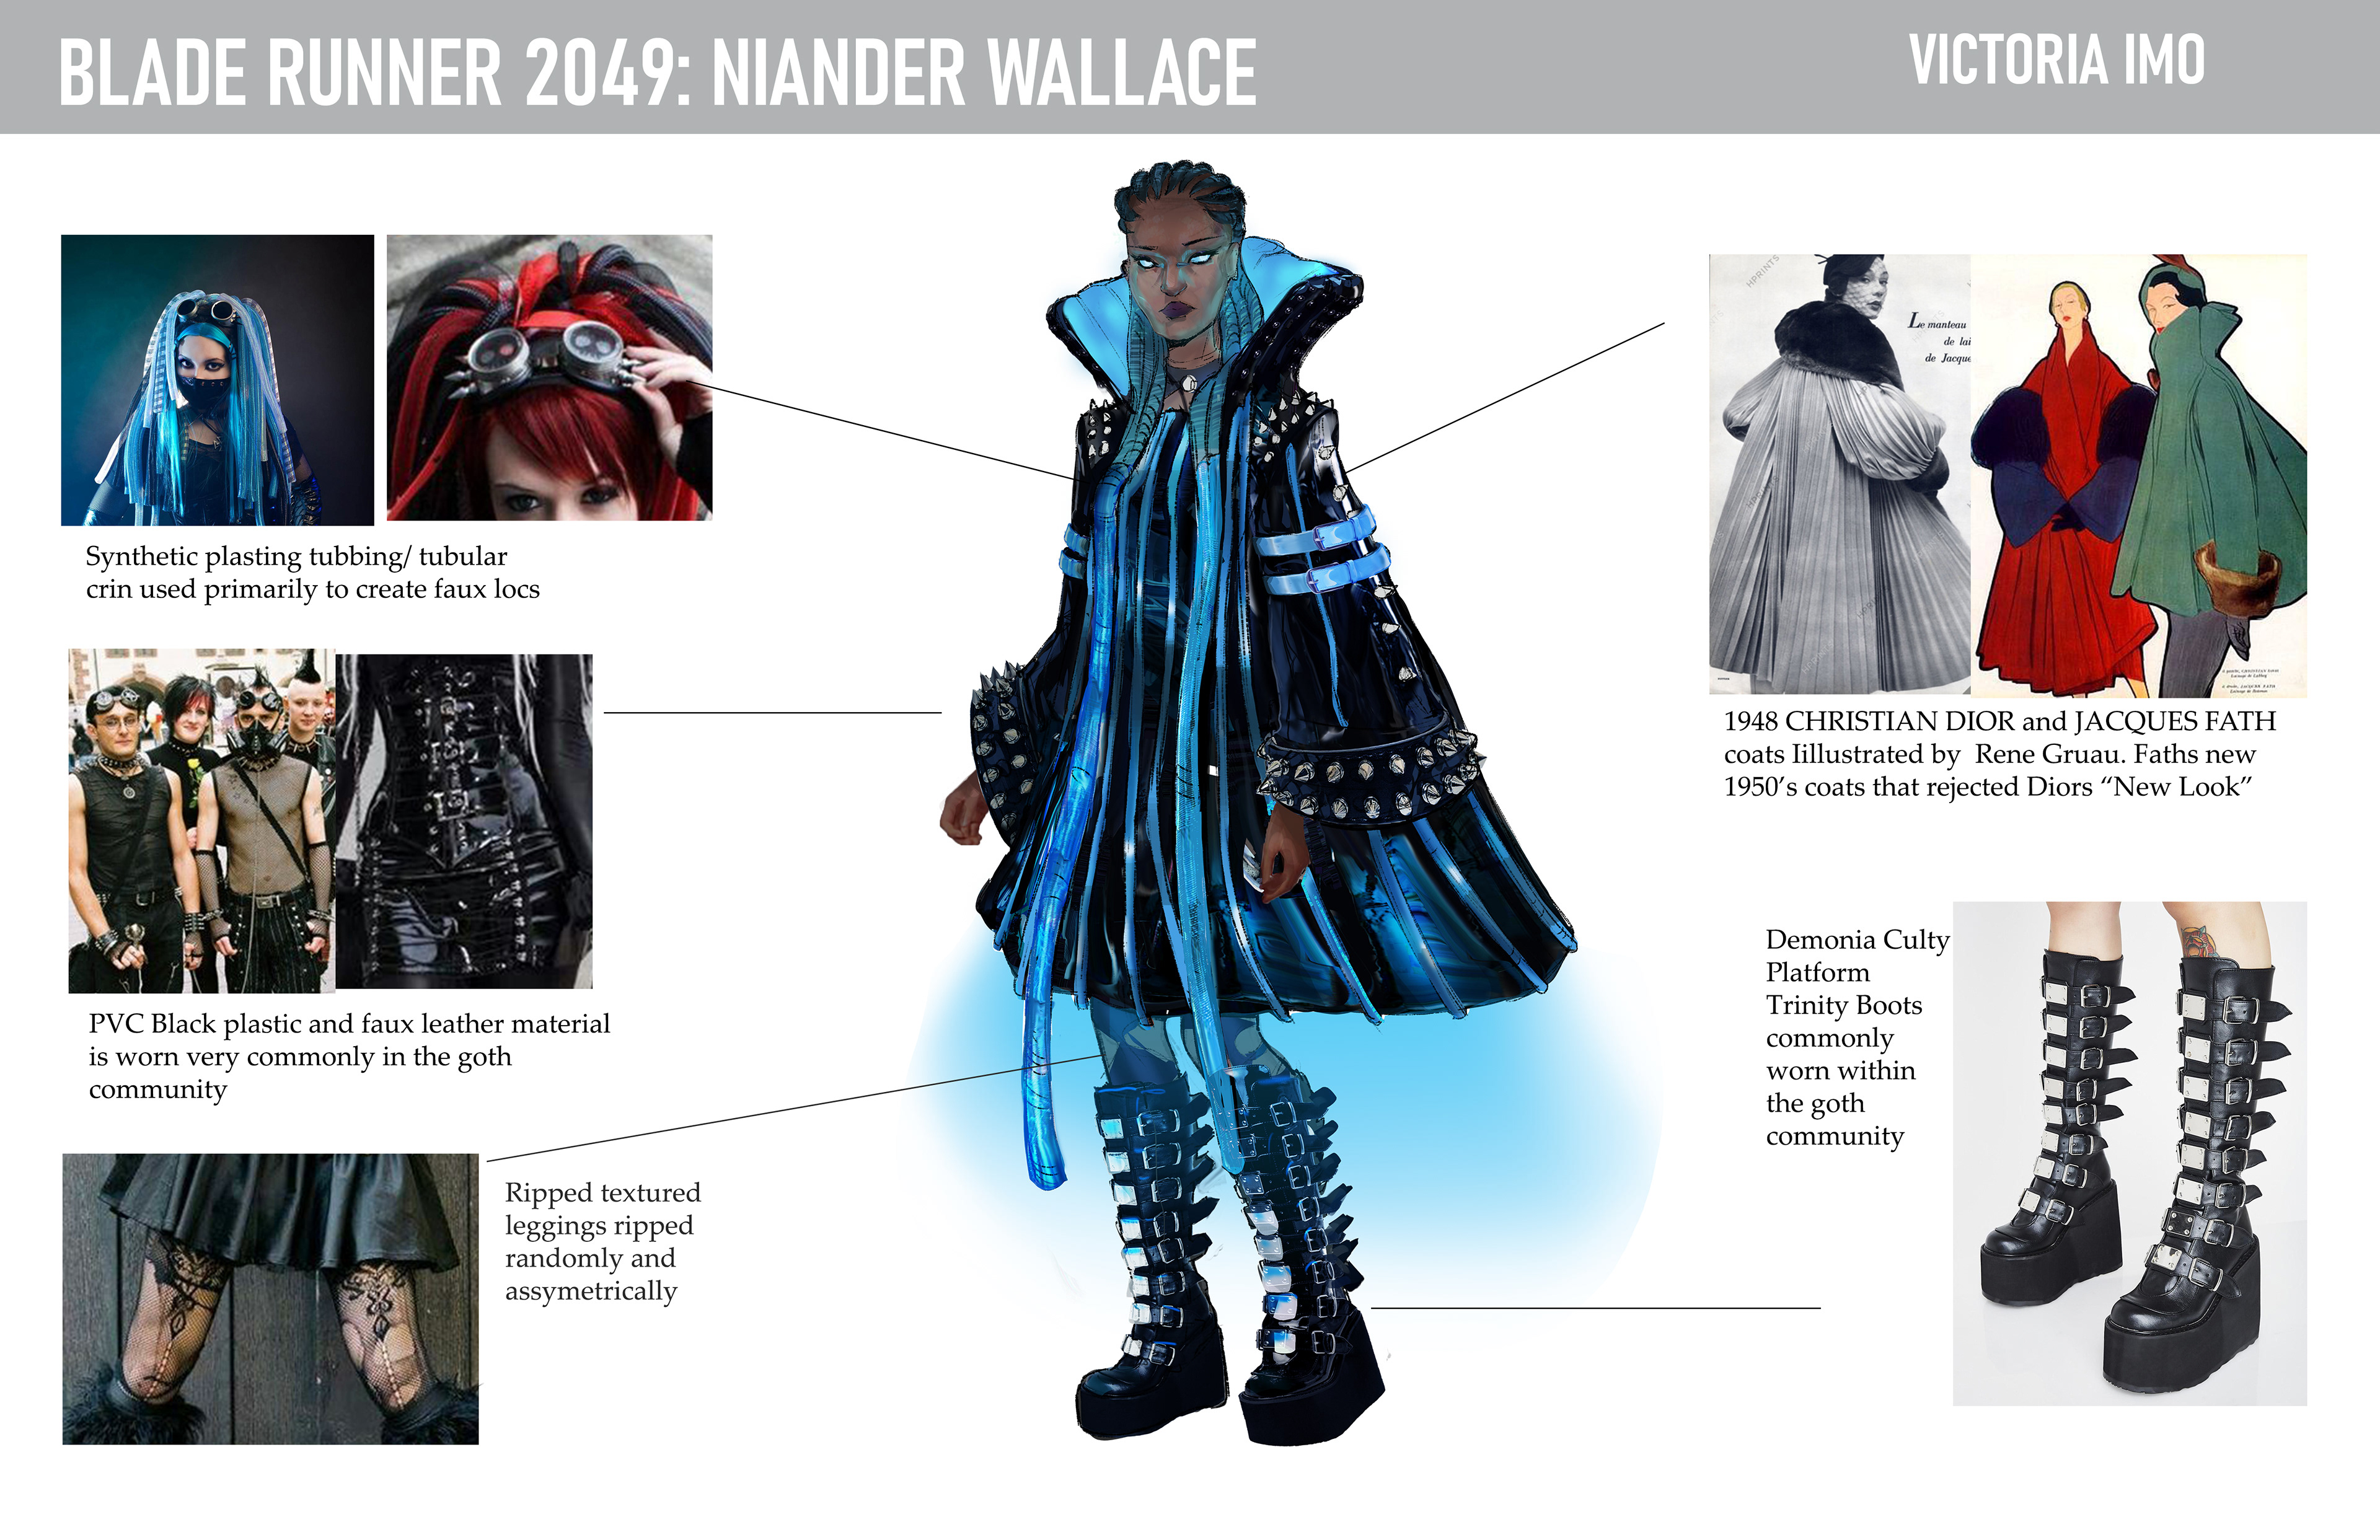 Victoria Imo - Blade Runner 2049: Costume Redesign